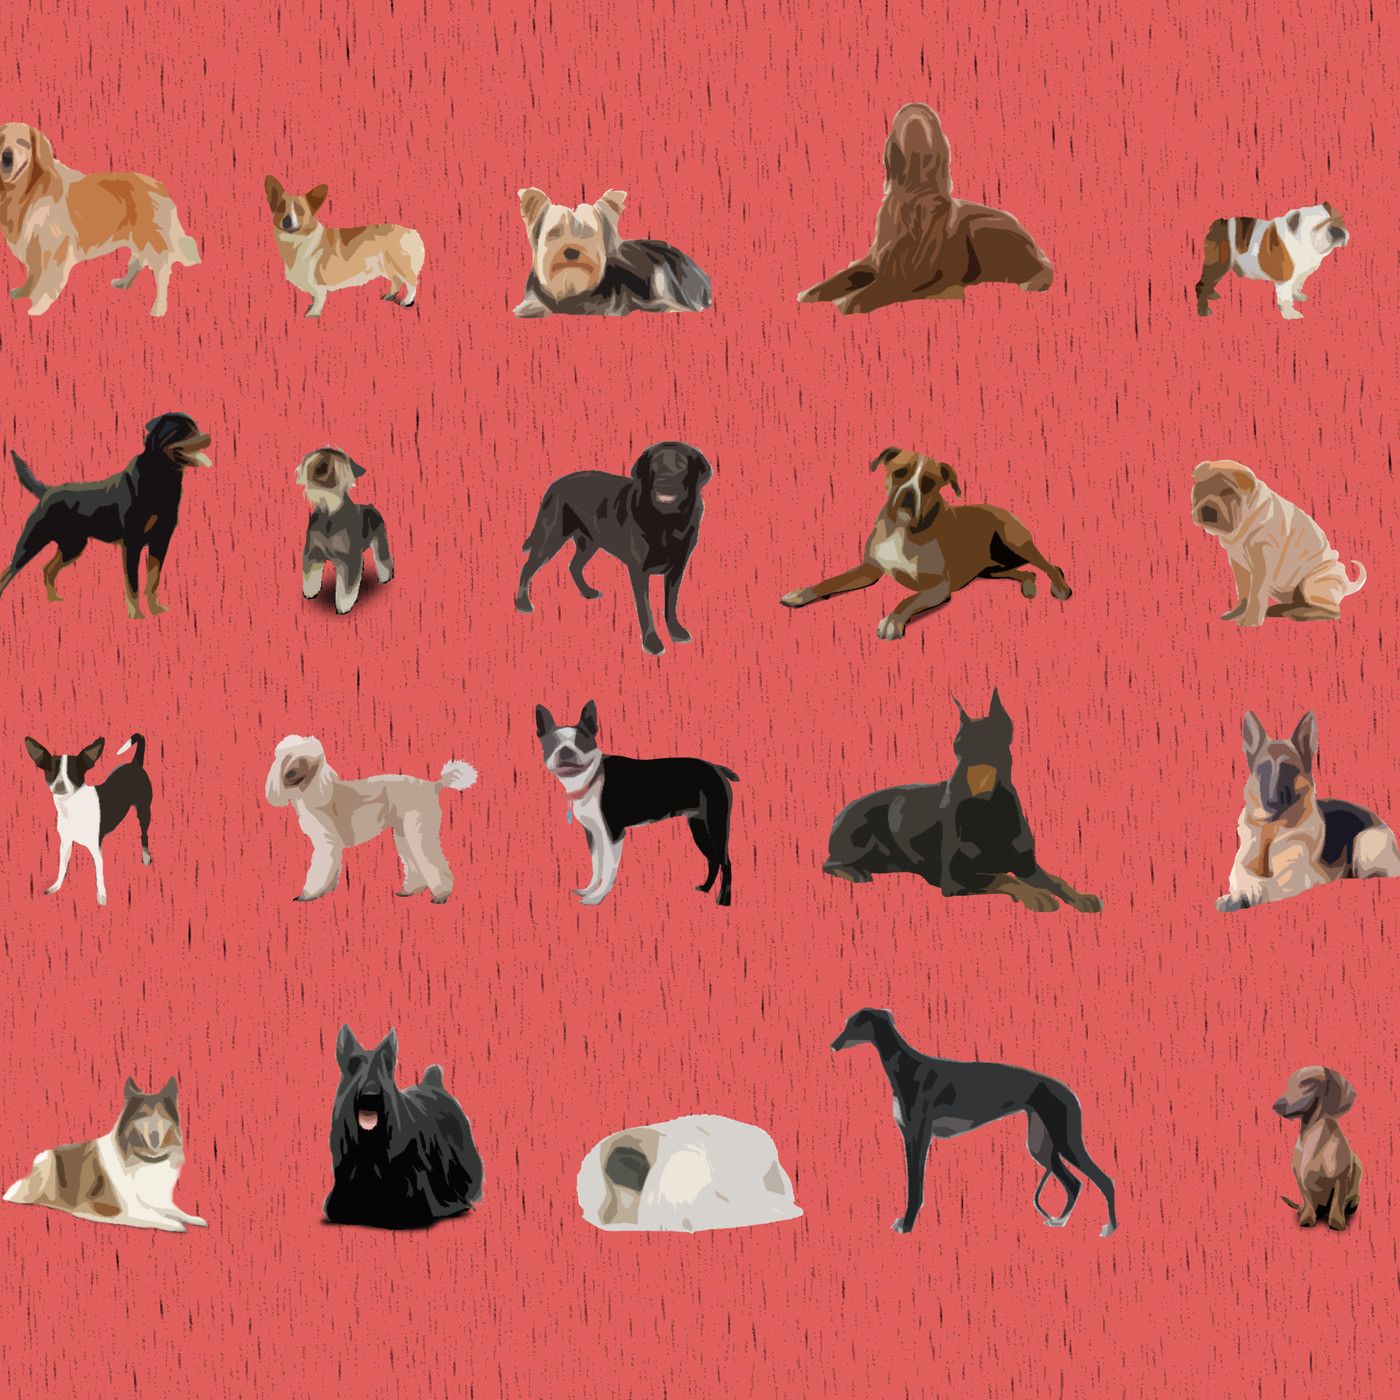 America's top dog: how the most popular breeds have changed over